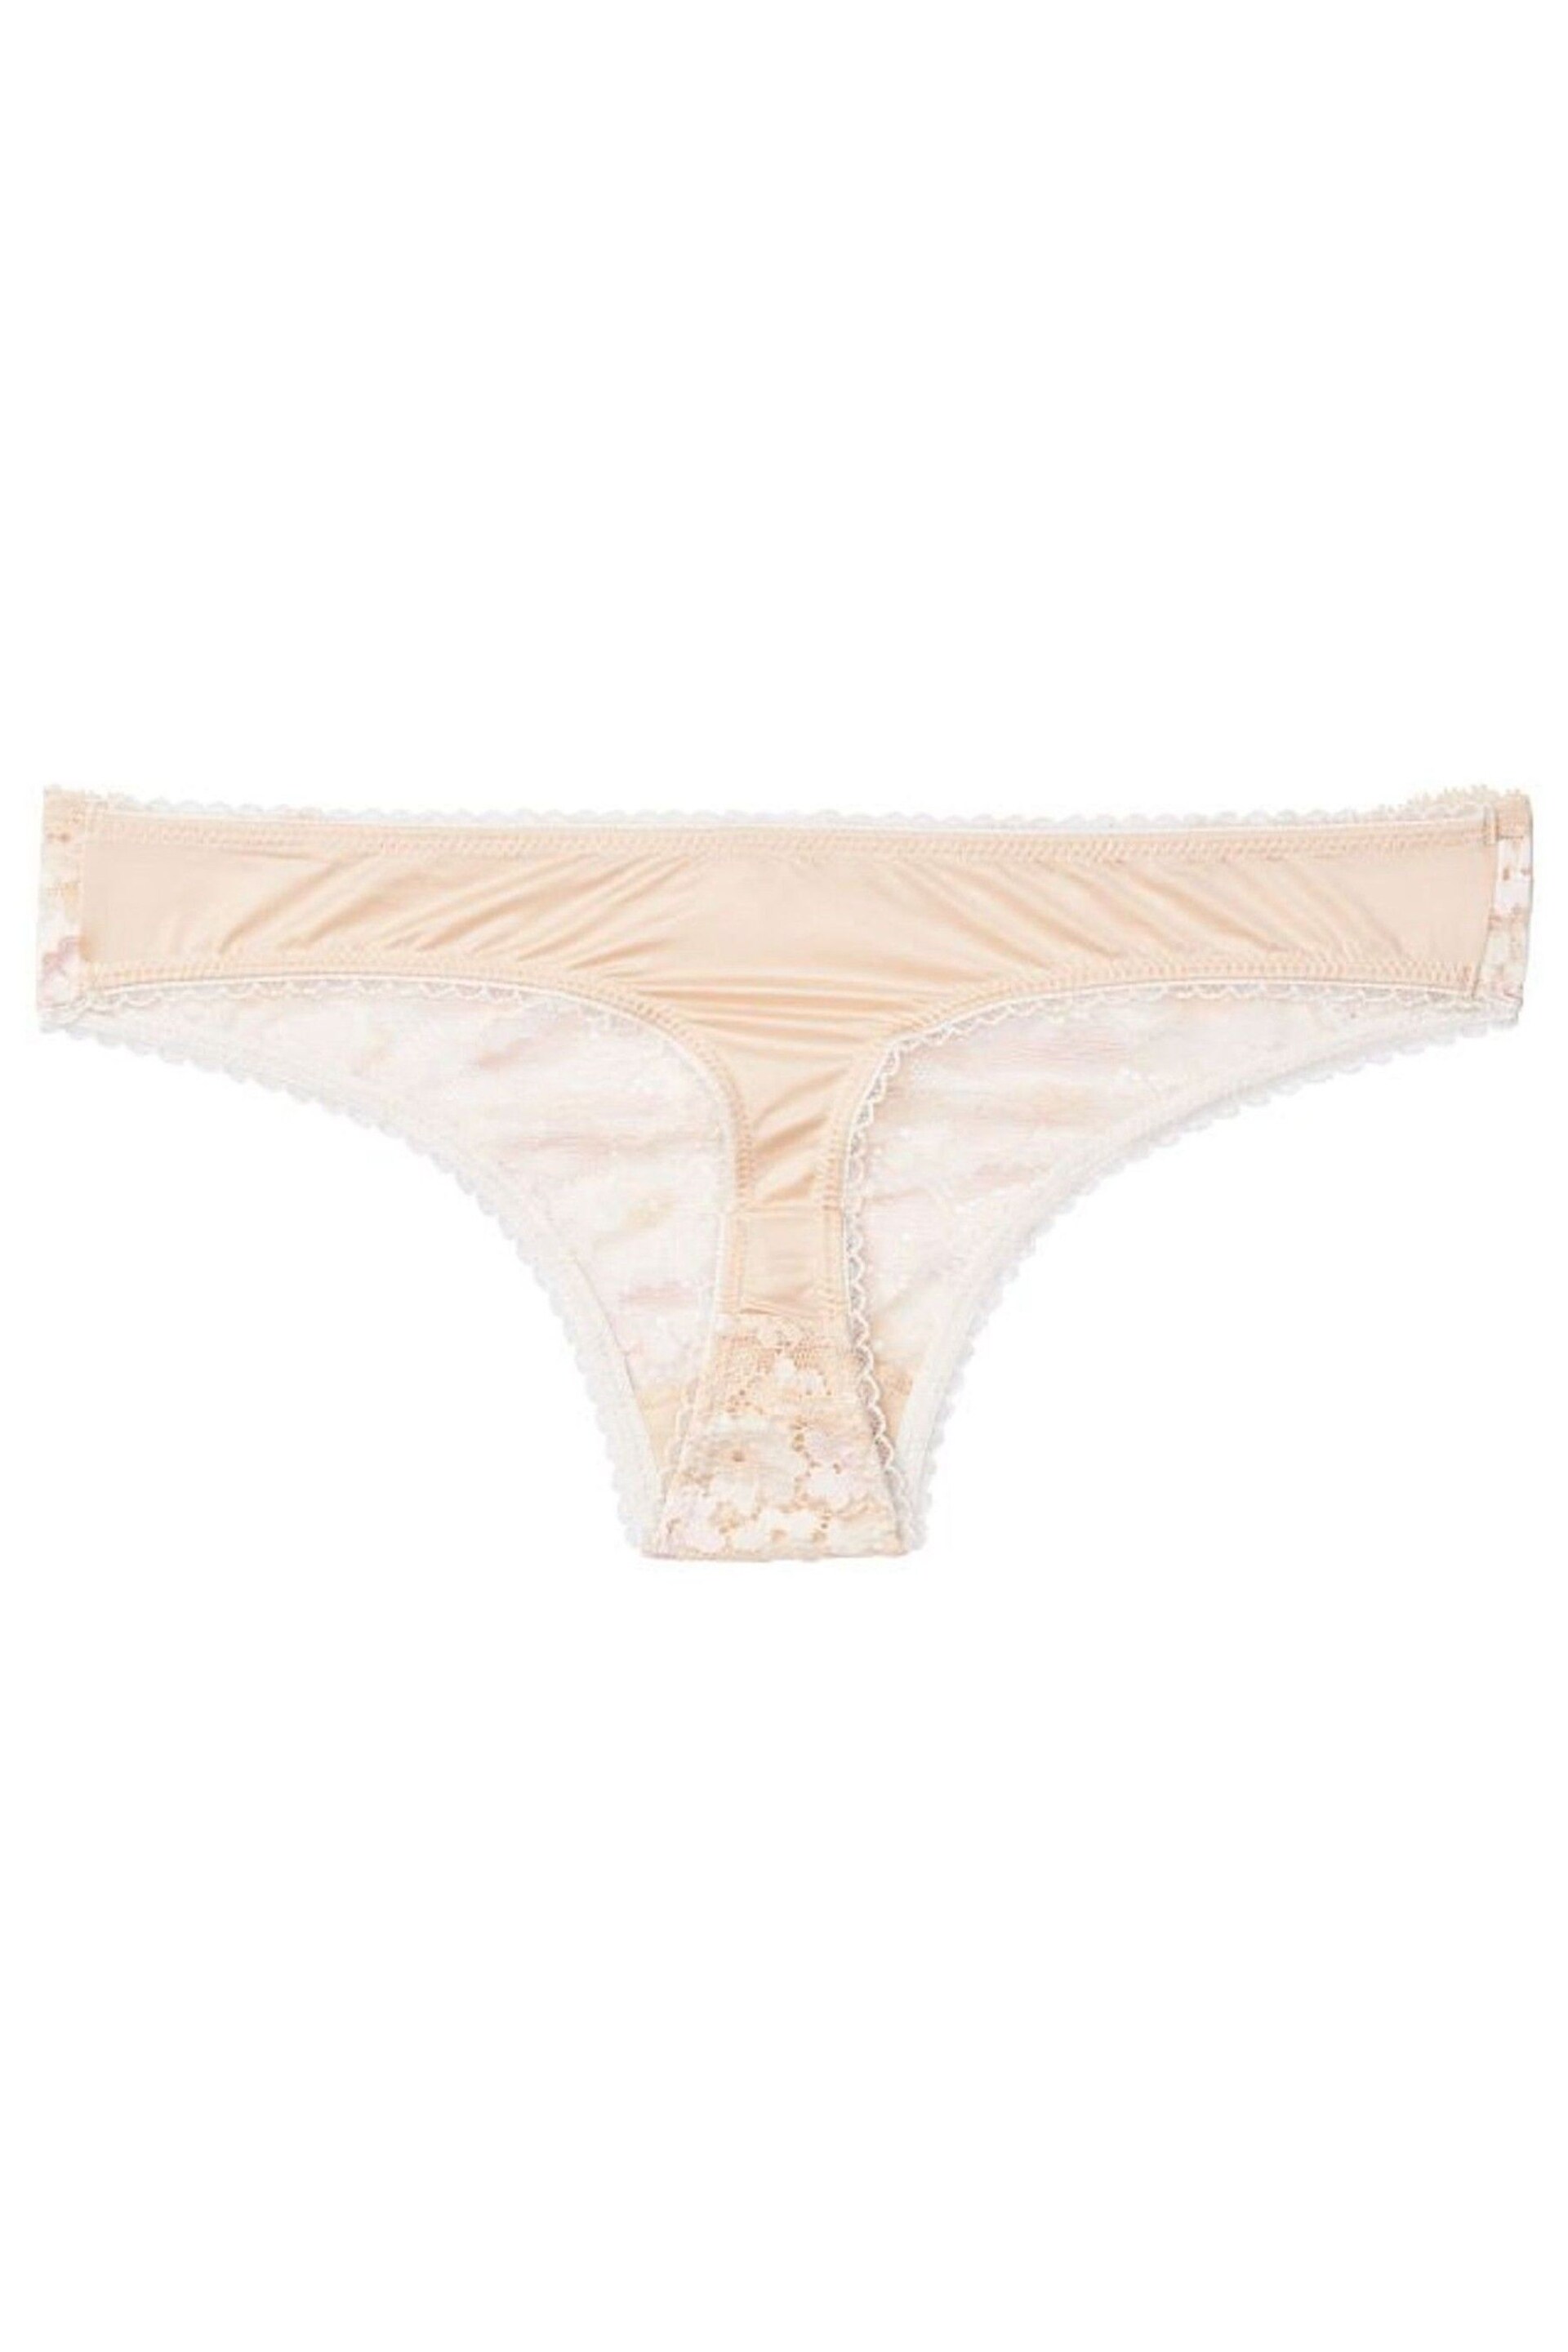 Victoria's Secret Champagne Nude Lace Thong Knickers - Image 3 of 3